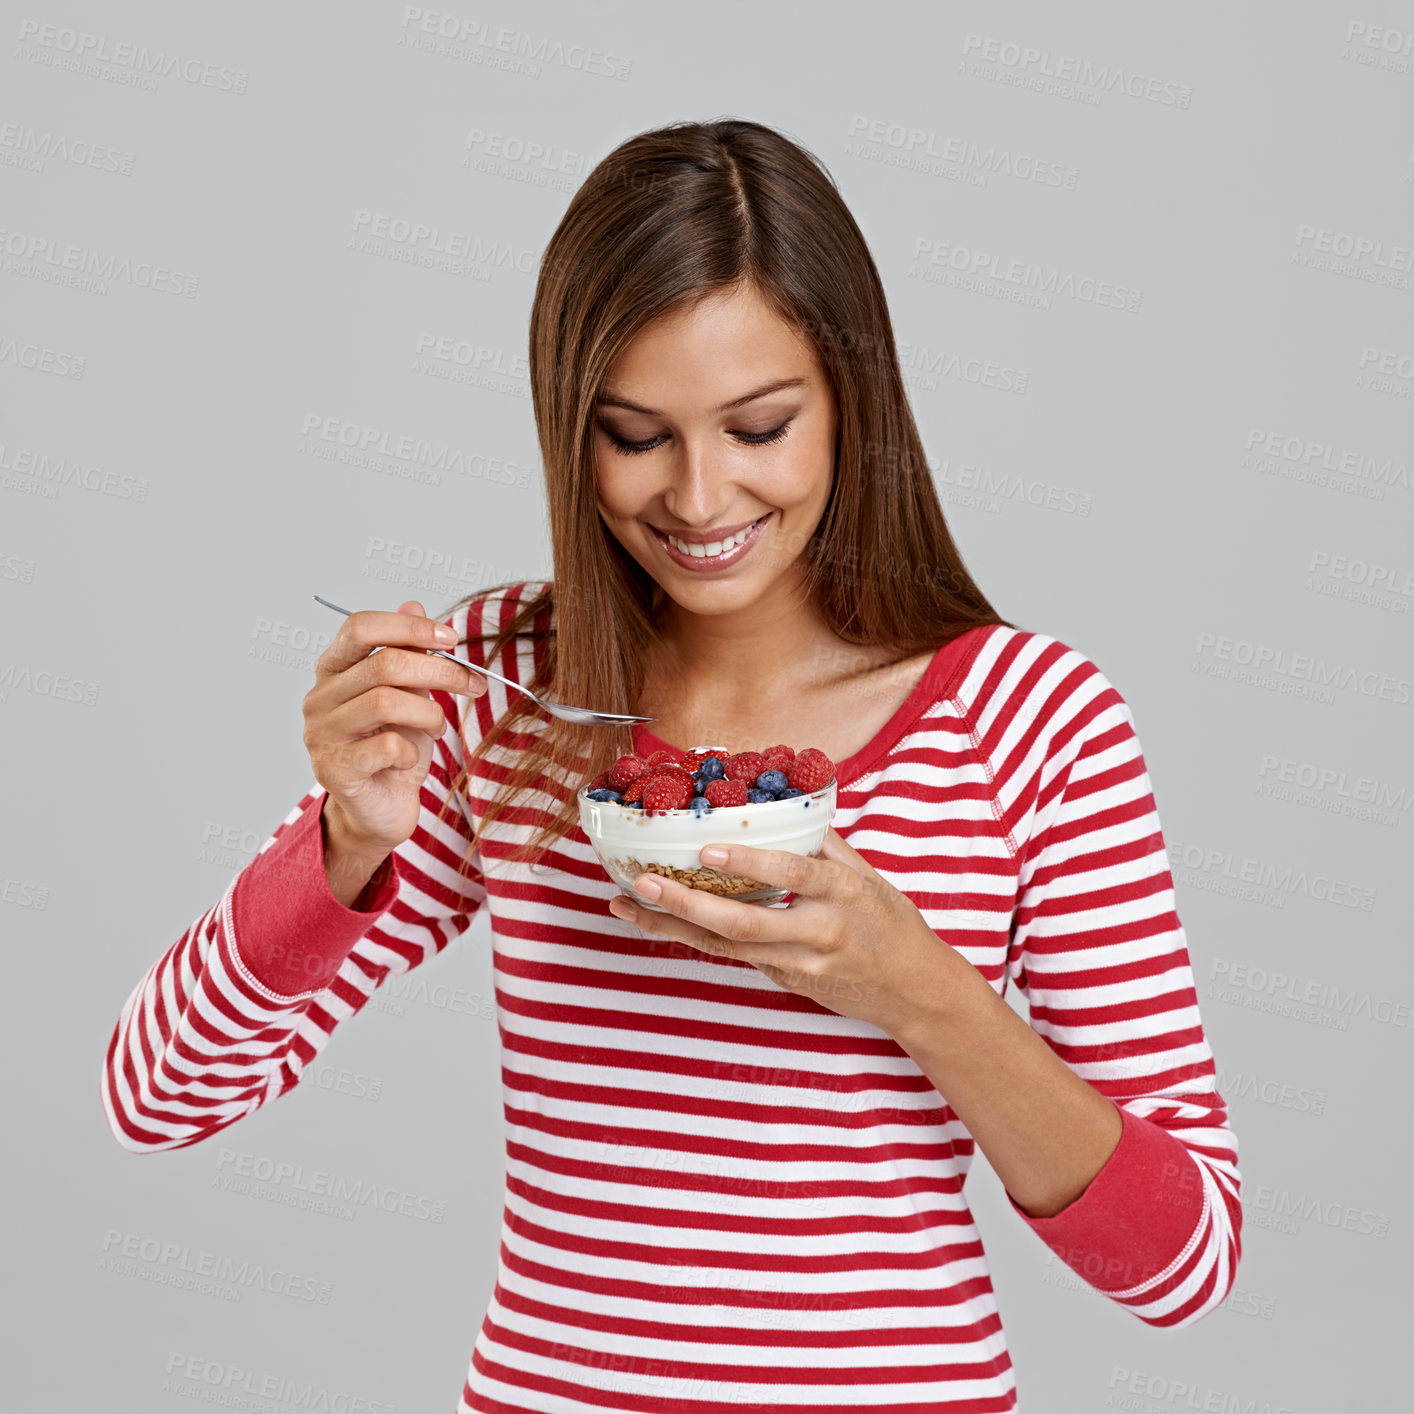 Buy stock photo Studio shot of an attractive young woman eating a bowl of berries on a grey background